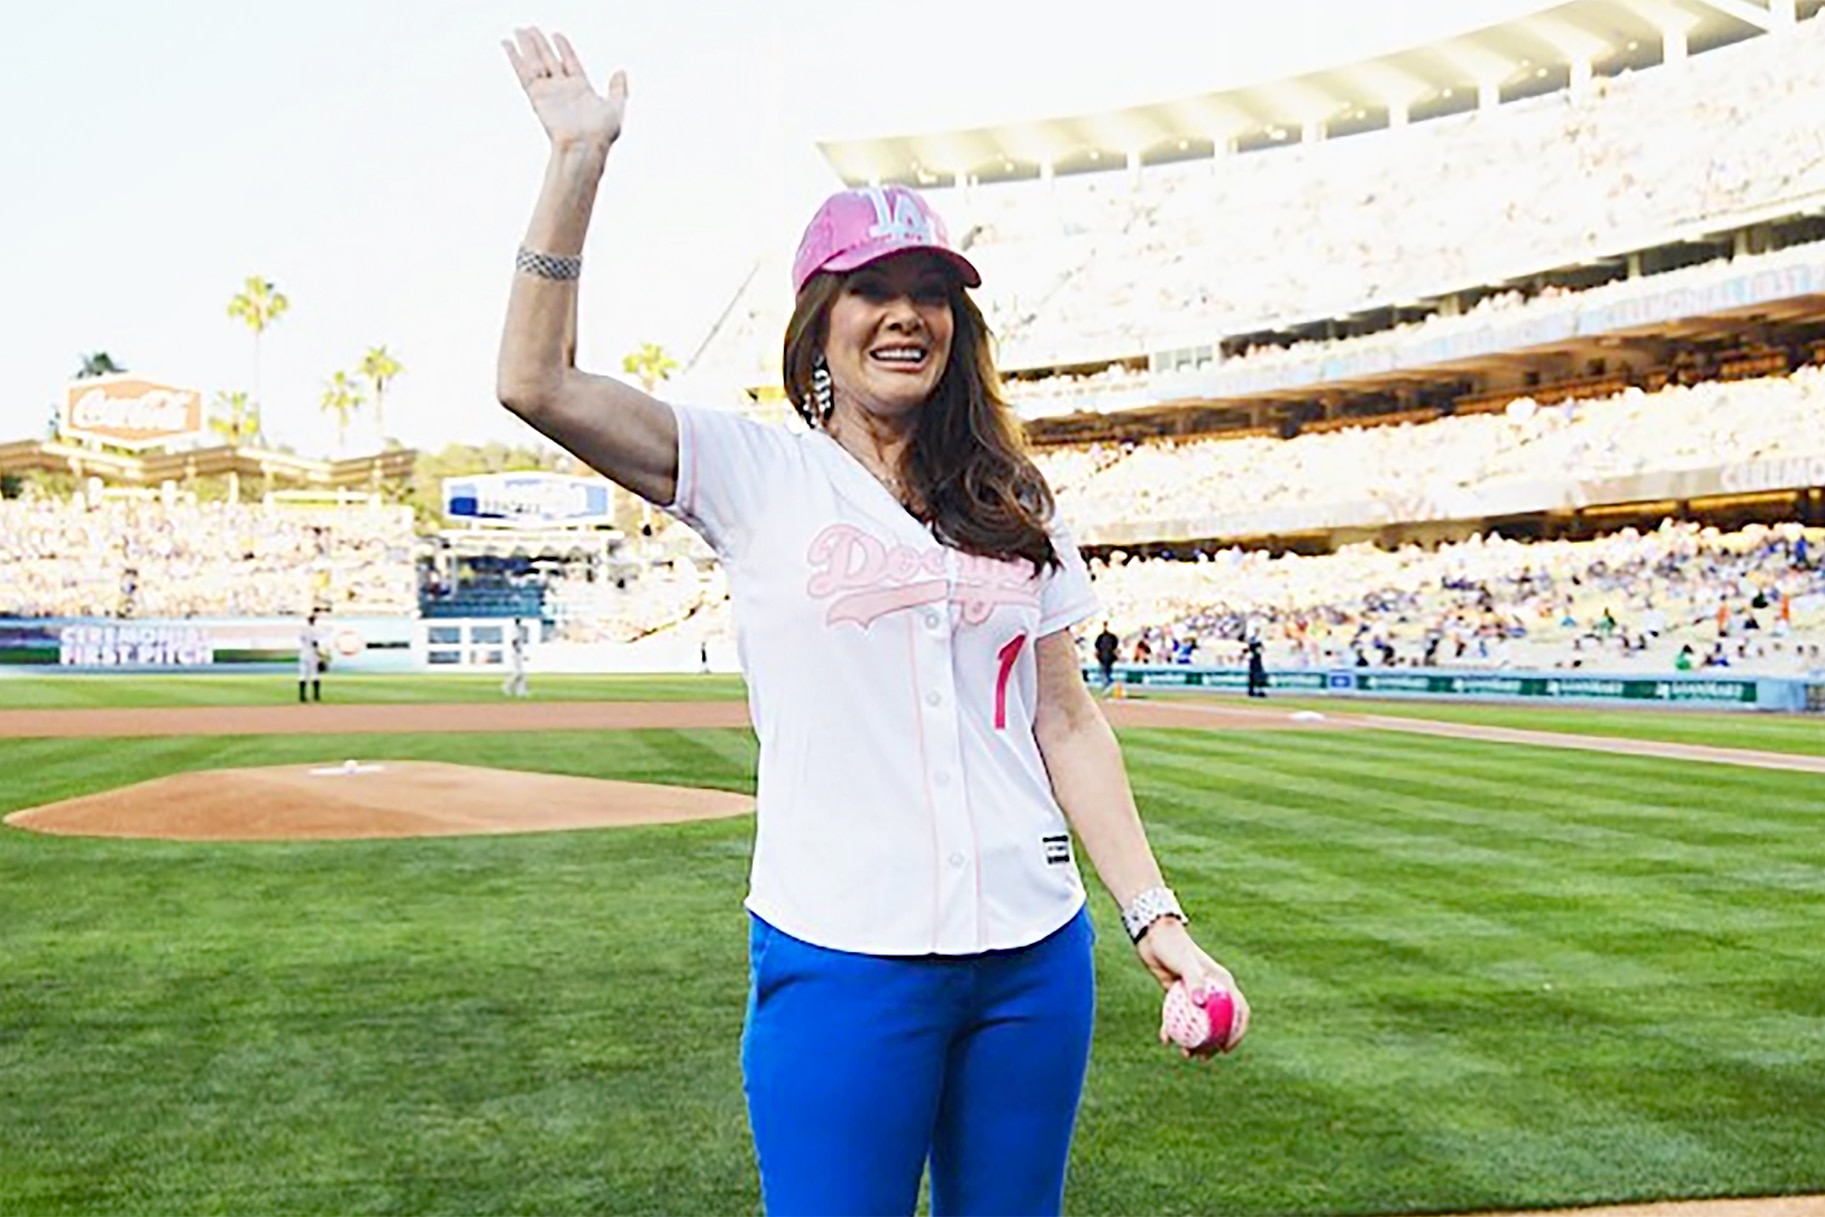 Desert woman lives out dream of throwing first pitch at Dodger Stadium